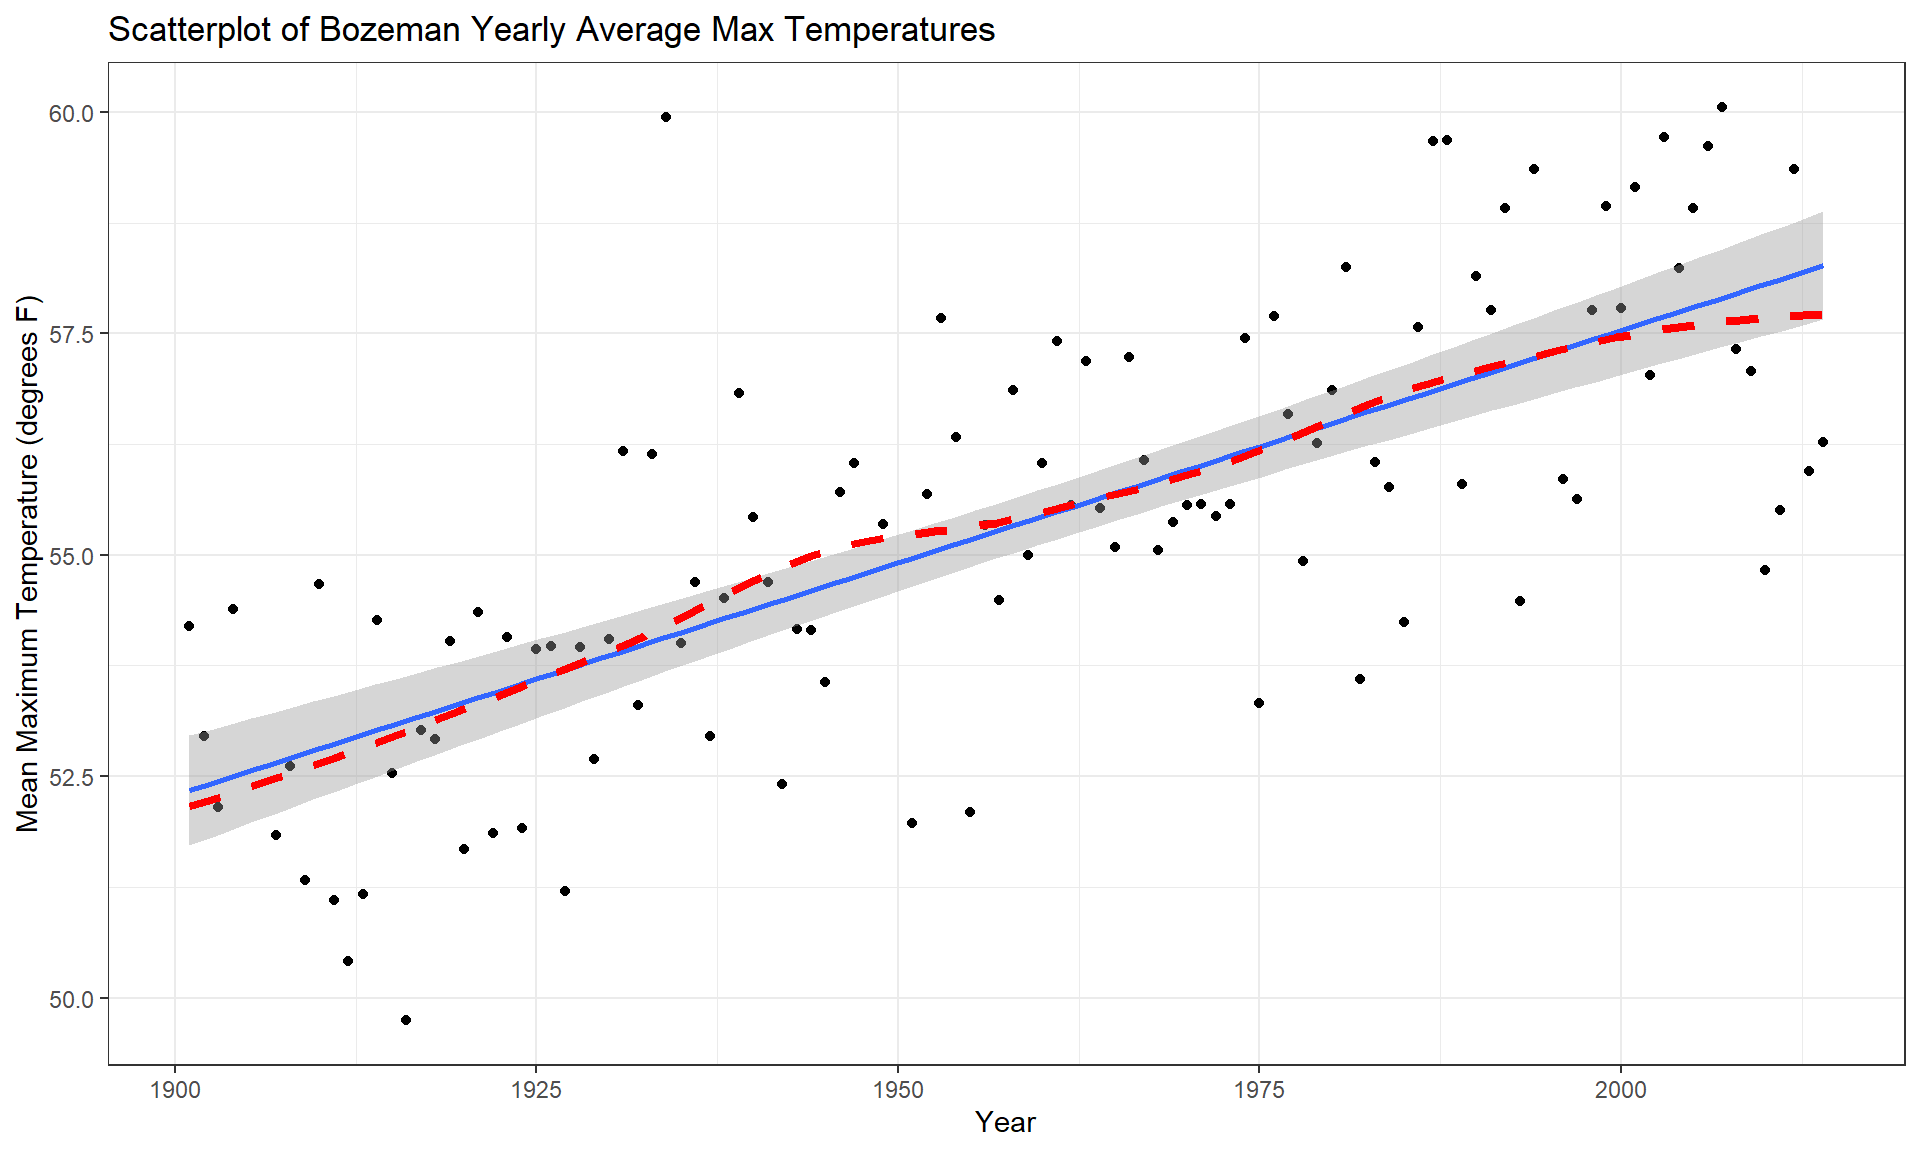 Scatterplot of average yearly maximum temperatures in Bozeman from 1900 to 2014 with SLR (solid) and smoothing (dashed) lines.